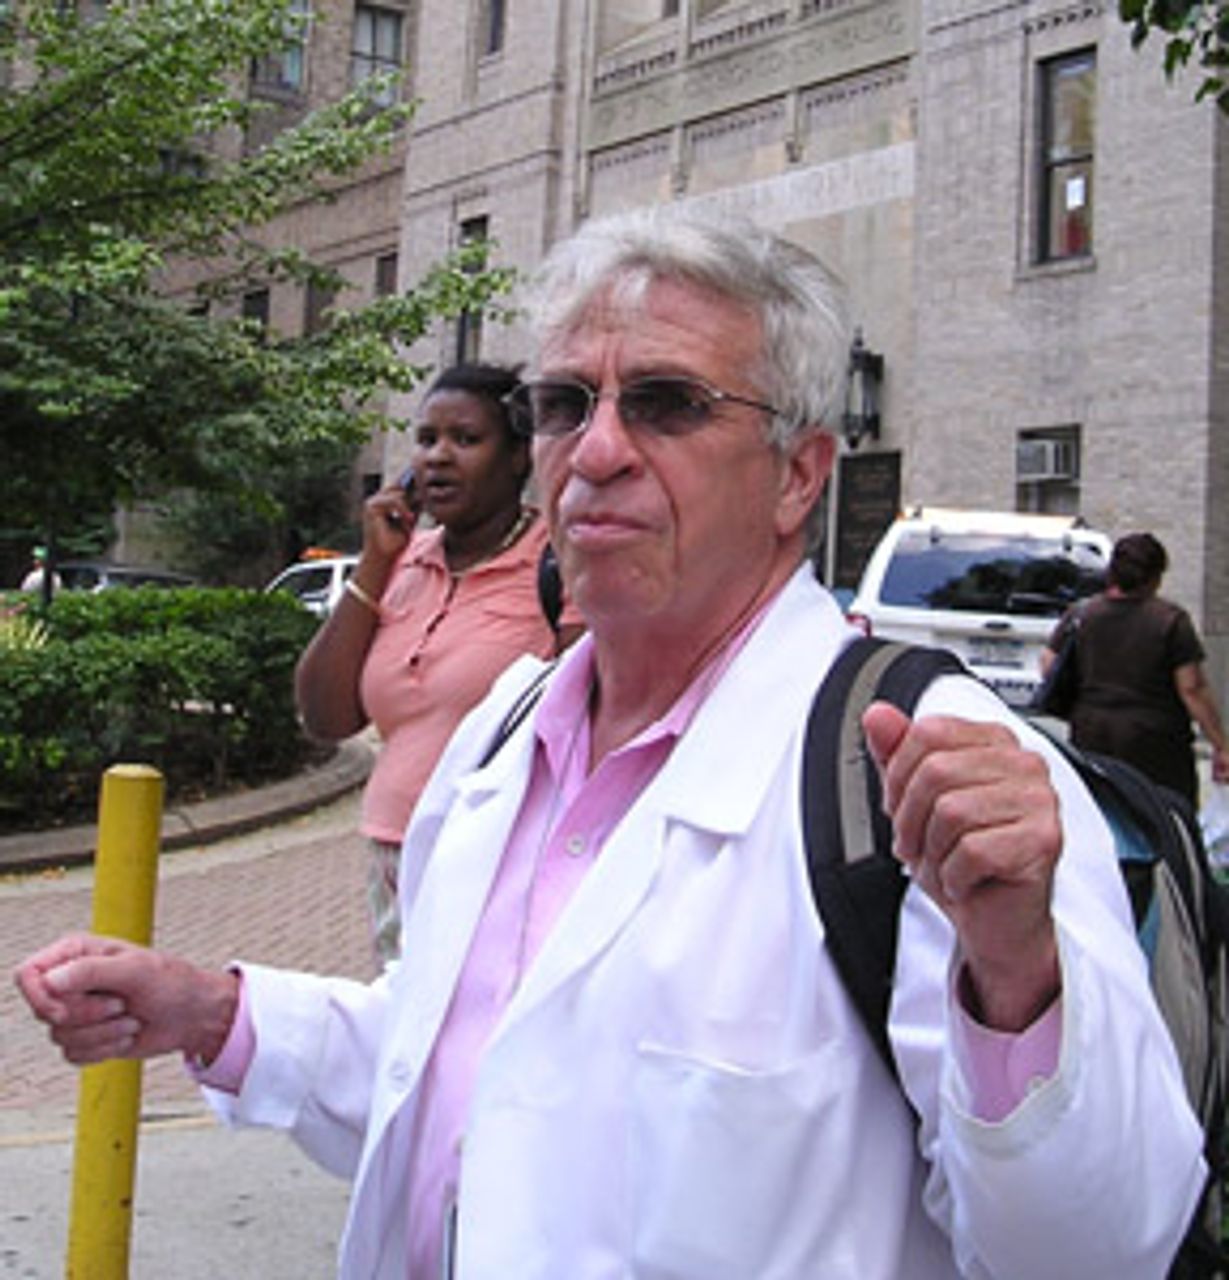 New York hospital workers face massive concessions in reopened contract - World Socialist Web Site